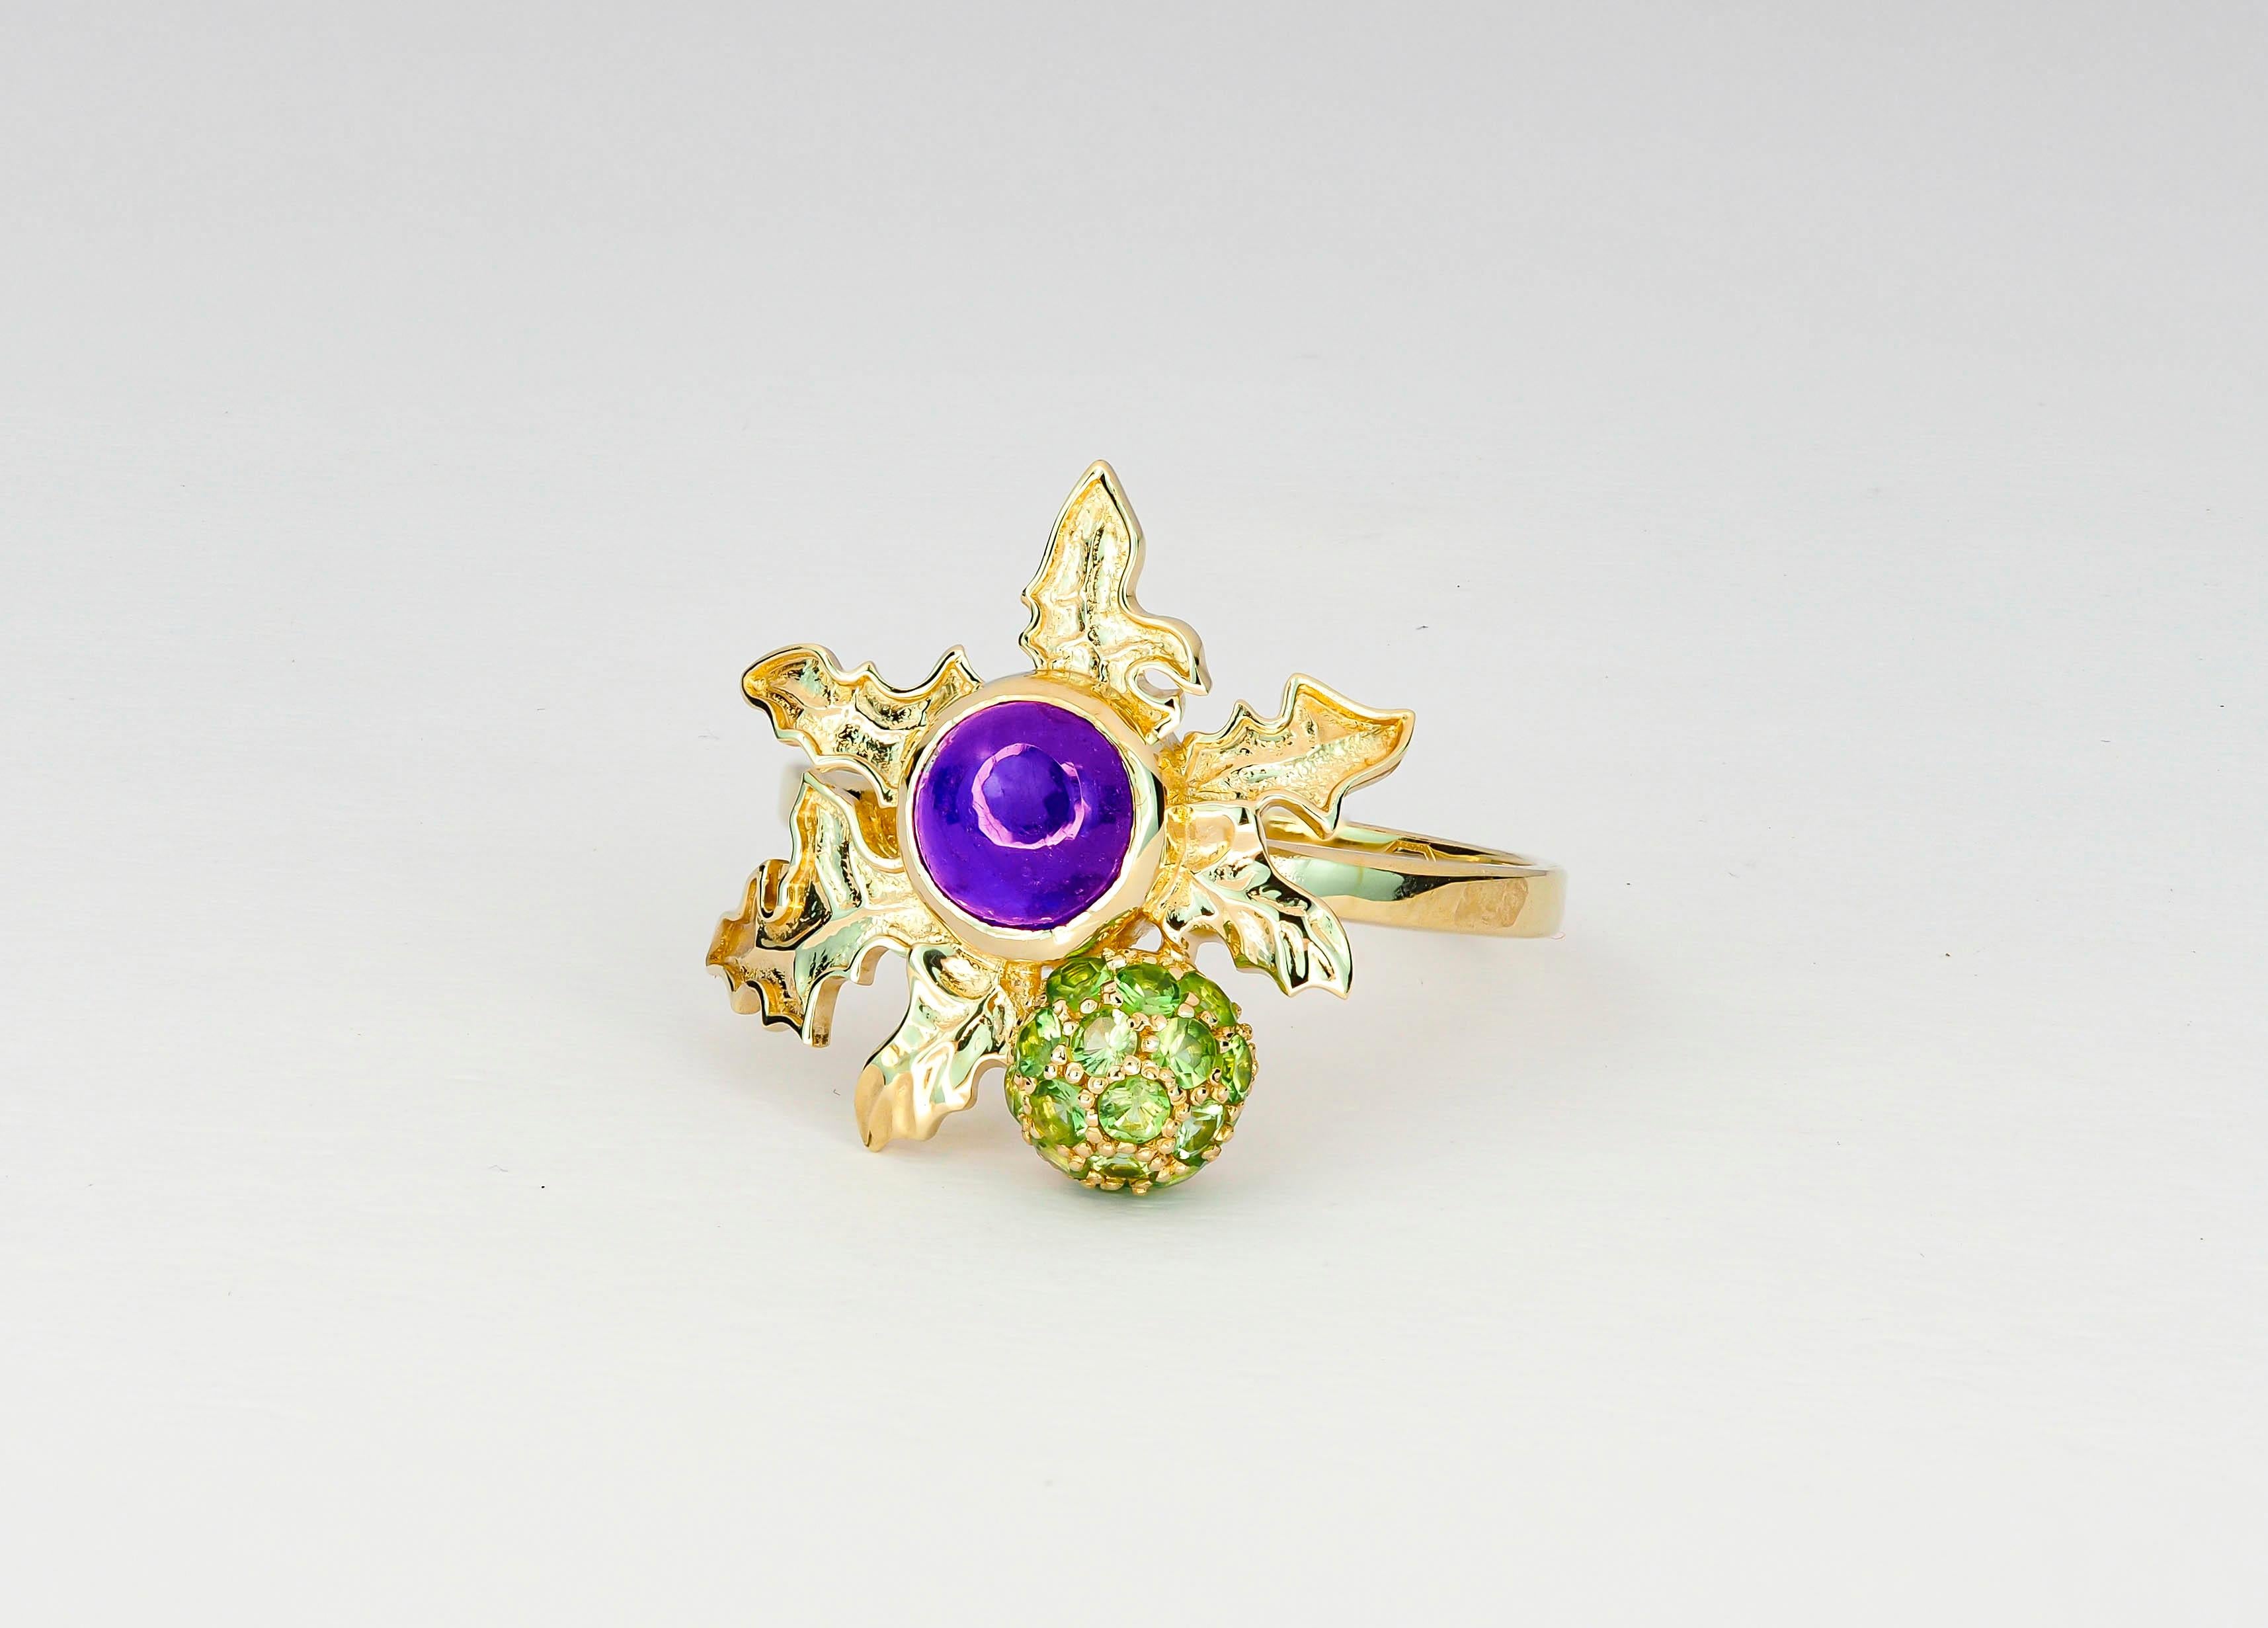 14 K Gold Scottish Thistle Ring with Amethyst and Peridots 3